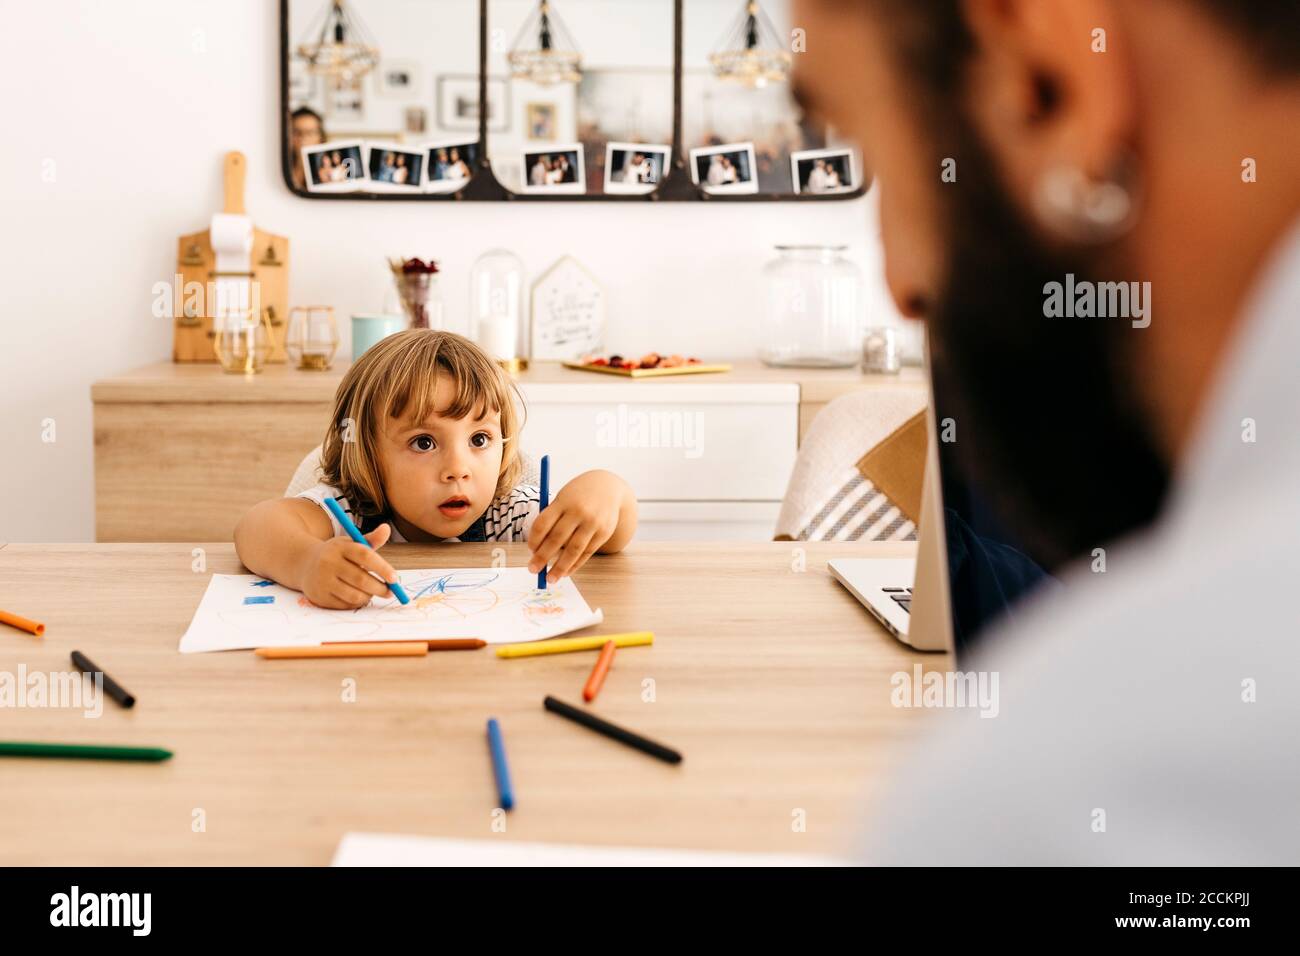 Cute girl looking at father while painting on paper in dining room Stock Photo